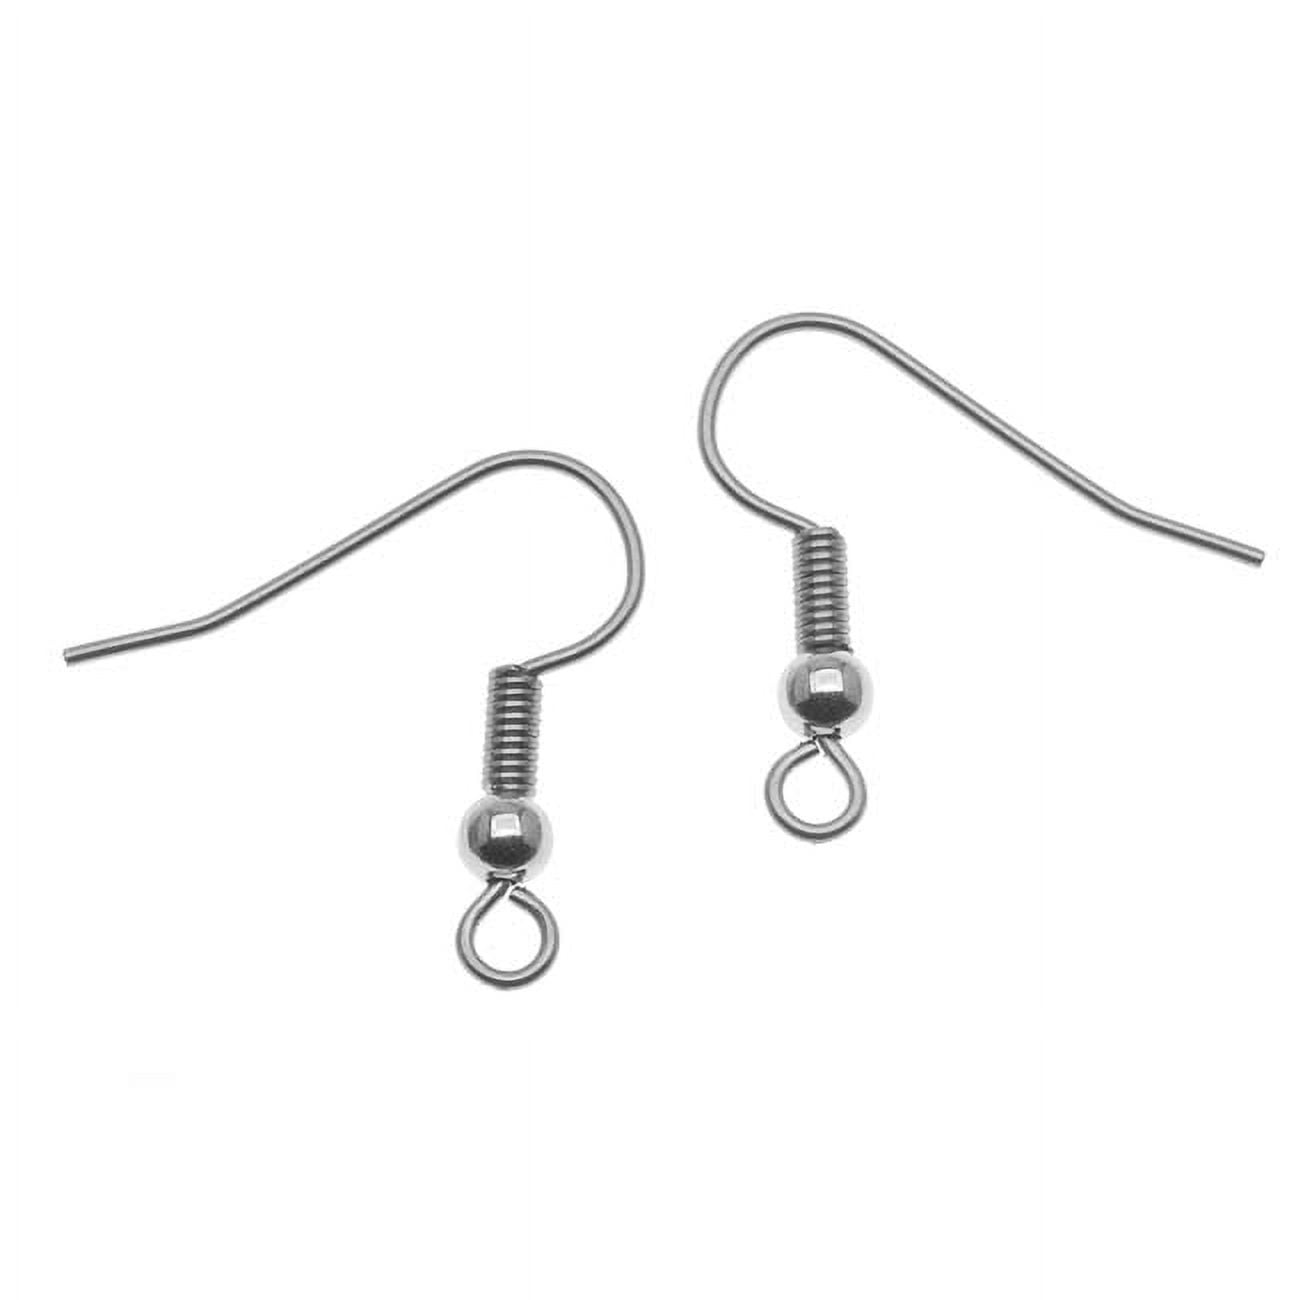 UnCommon Artistry Hypo-Allergenic Surgical Steel Earring Hooks (100)  Jewelry Making Findings (100) (Surgical Steel) - Hypo-Allergenic Surgical  Steel Earring Hooks (100) Jewelry Making Findings (100) (Surgical Steel) .  shop for UnCommon Artistry